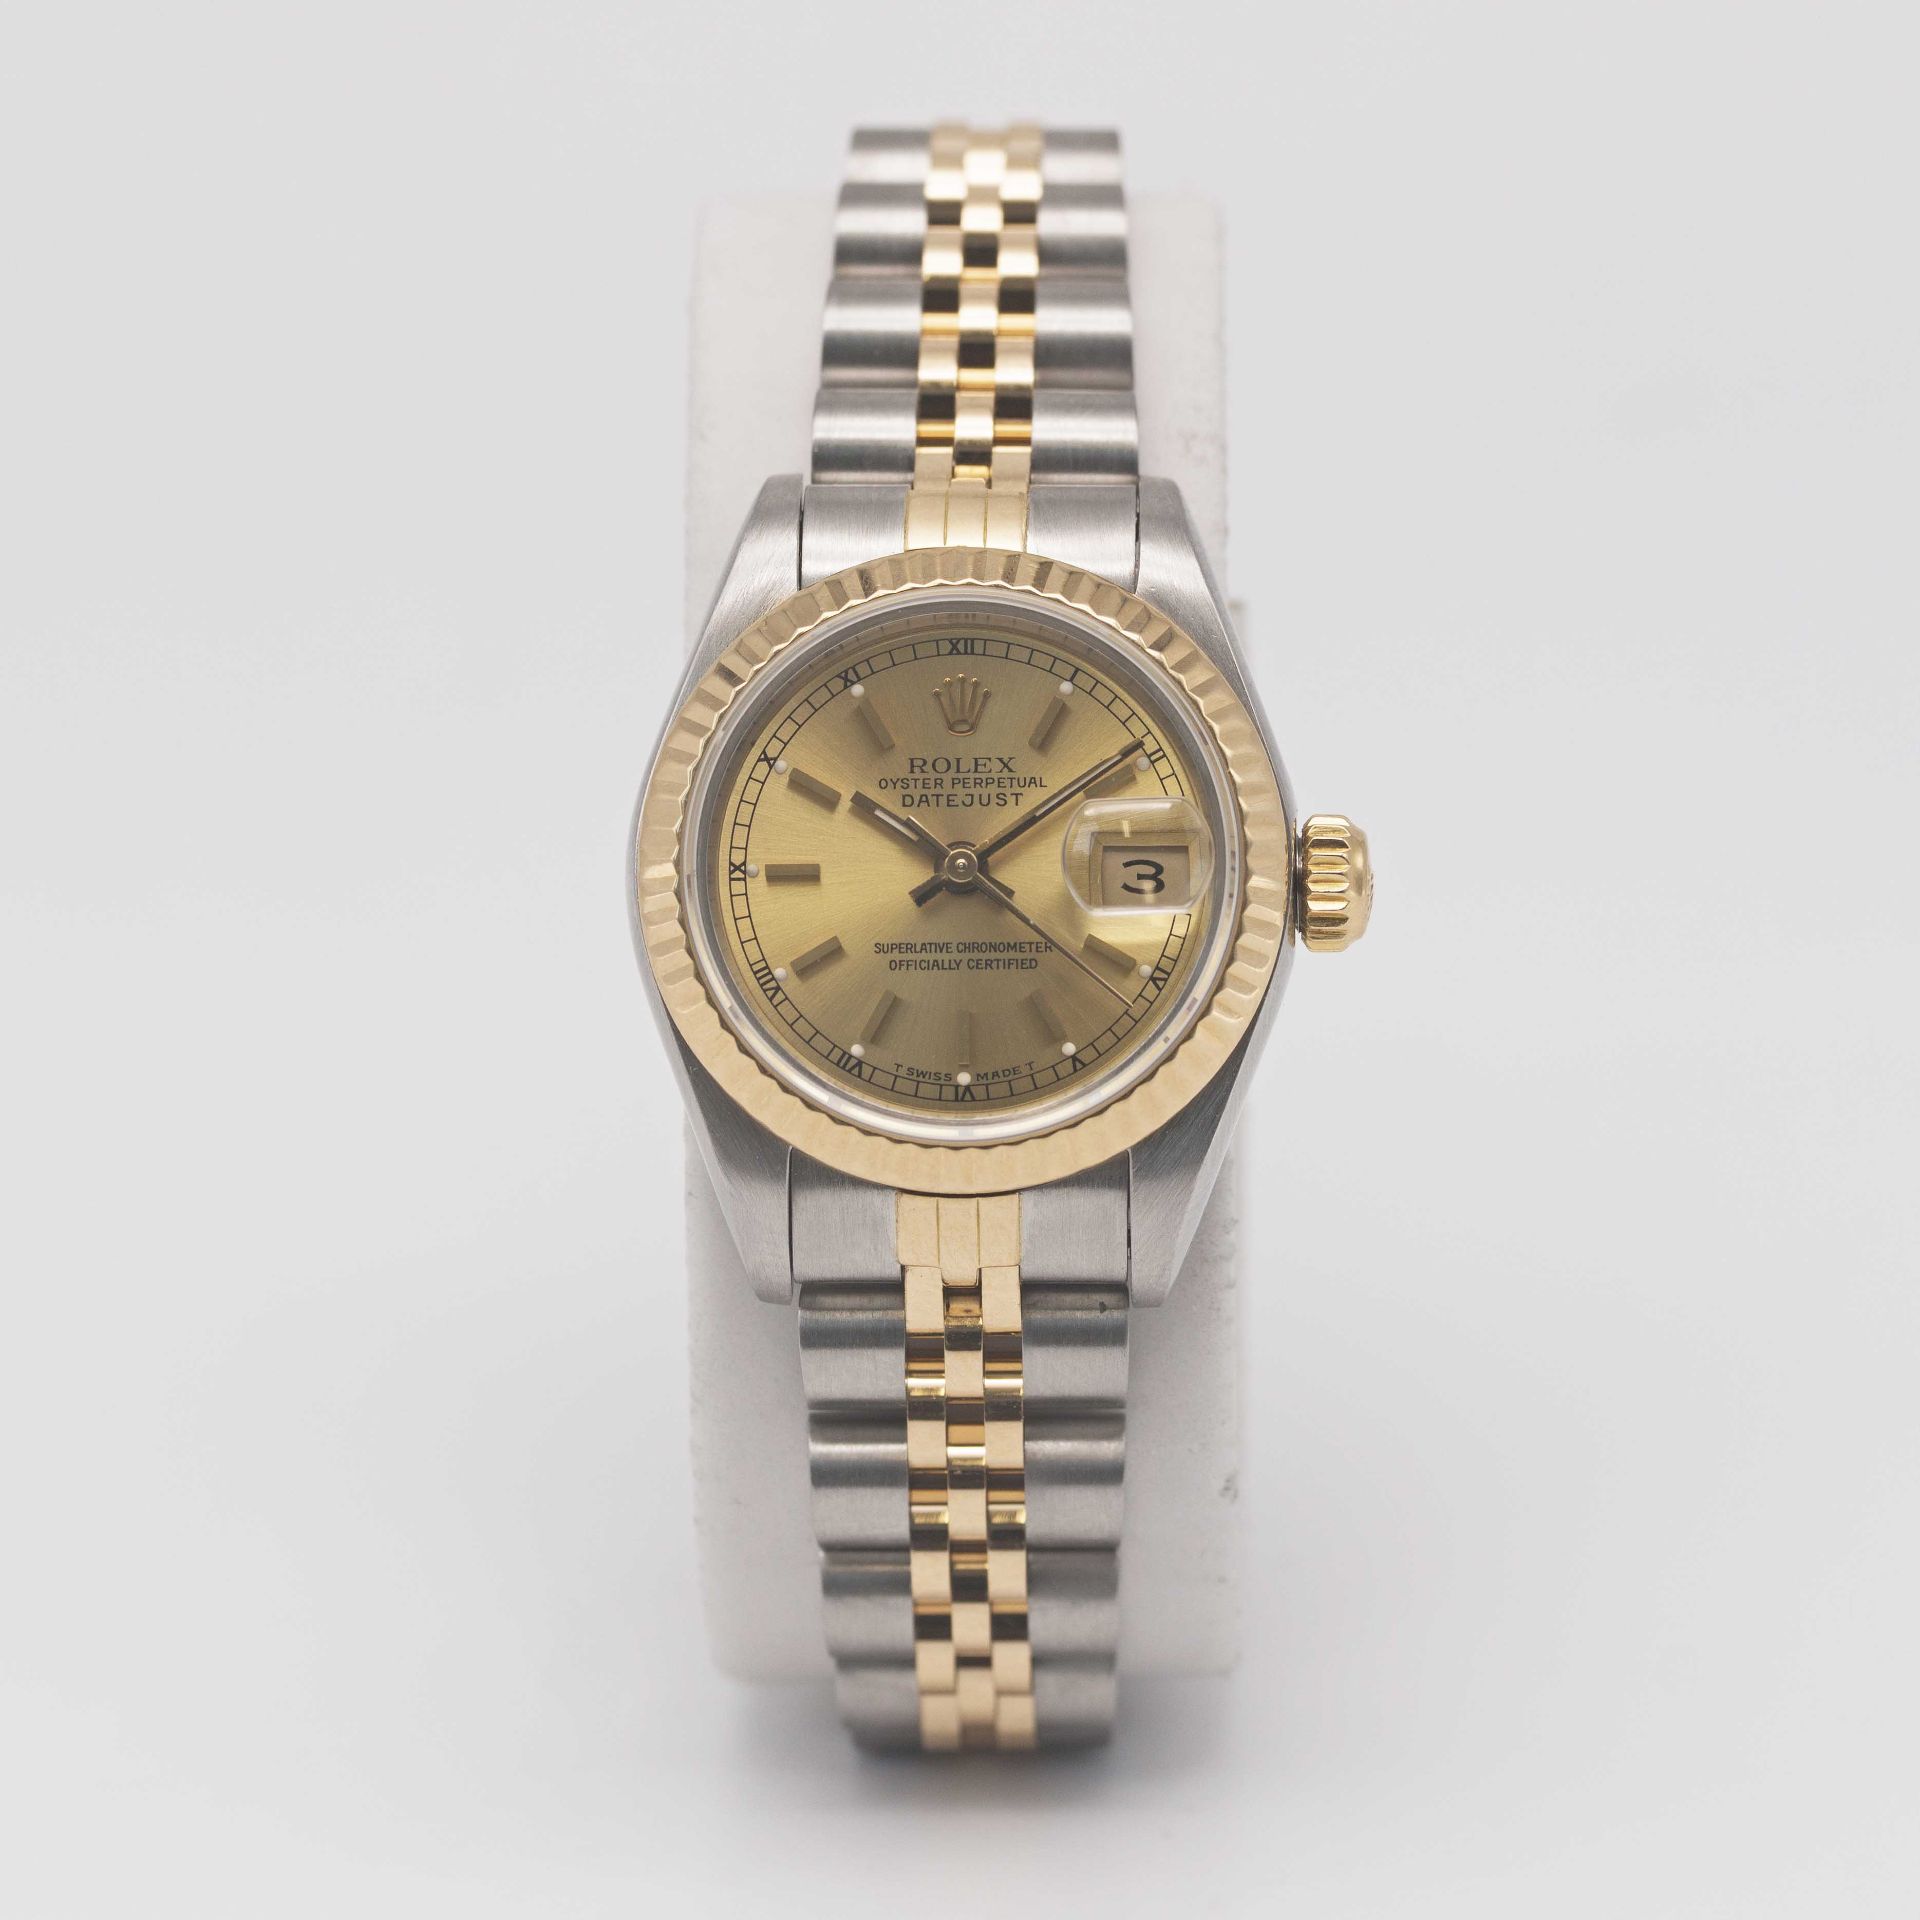 A LADIES STEEL & GOLD ROLEX OYSTER PERPETUAL DATEJUST BRACELET WATCH CIRCA 2000, REF. 69173 WITH - Image 2 of 12